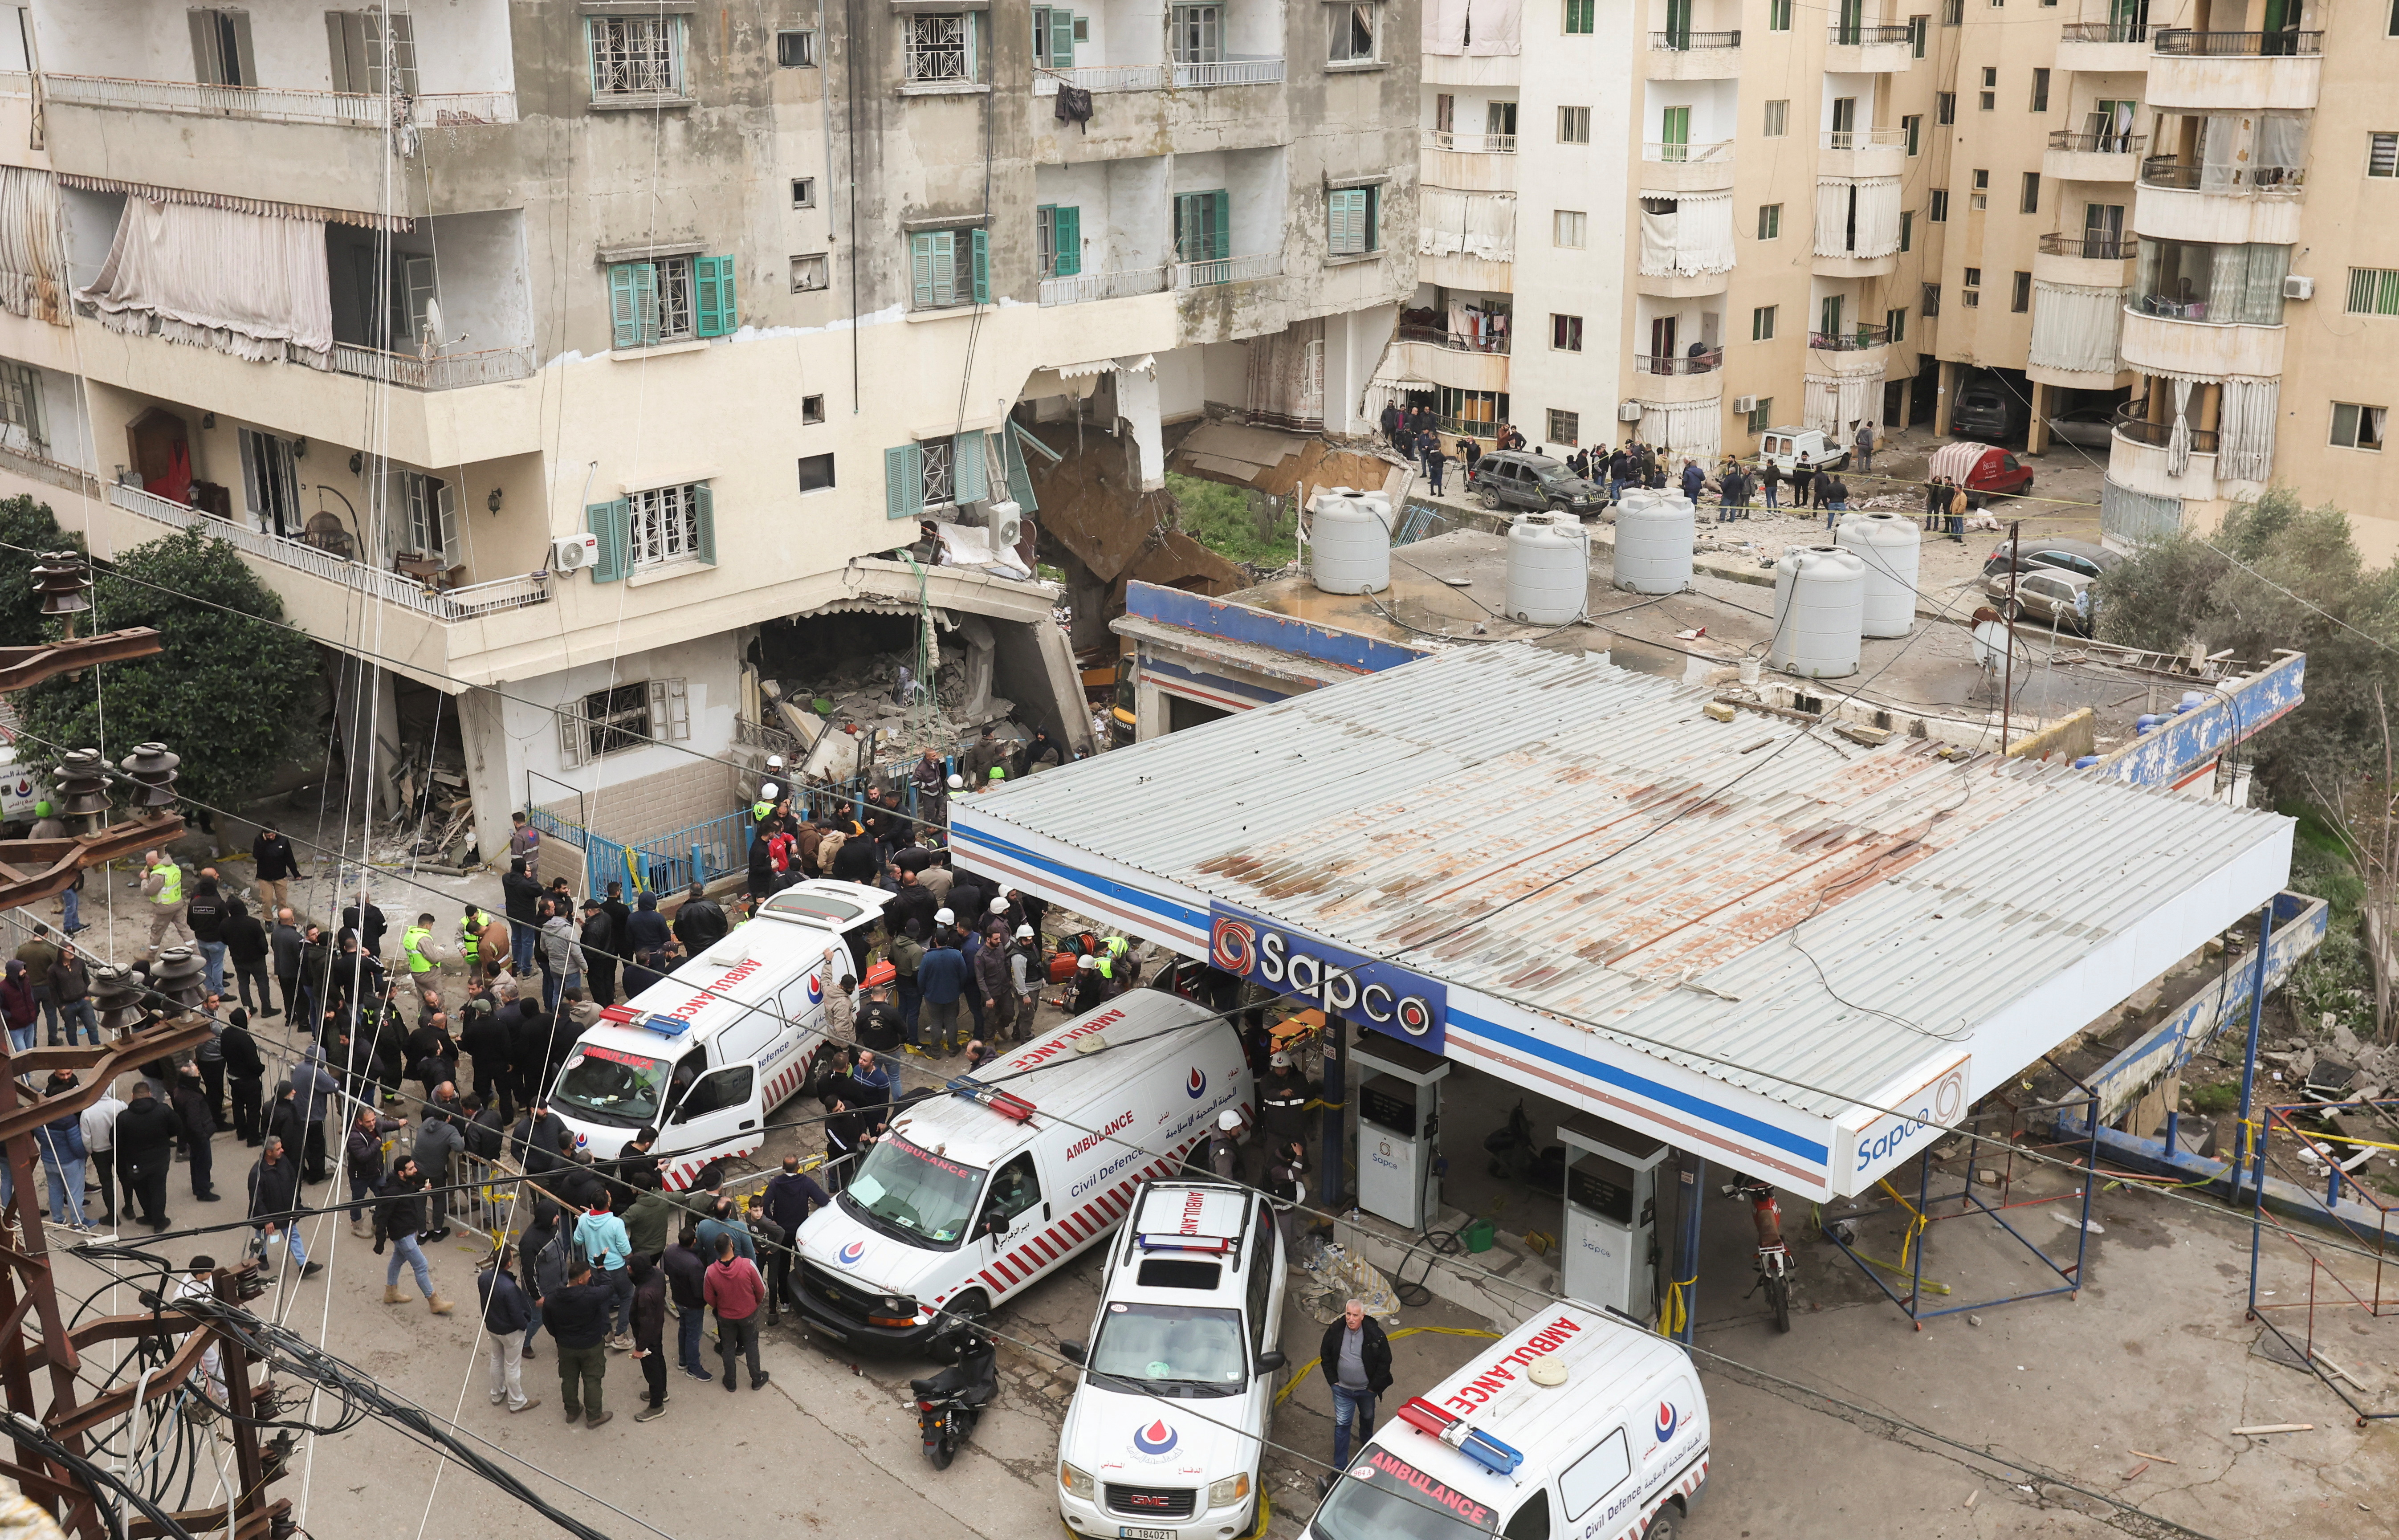 People gather near ambulances at a damaged site of what security sources said was an Israeli strike in Nabatieh./Reuters/Aziz Taher.
